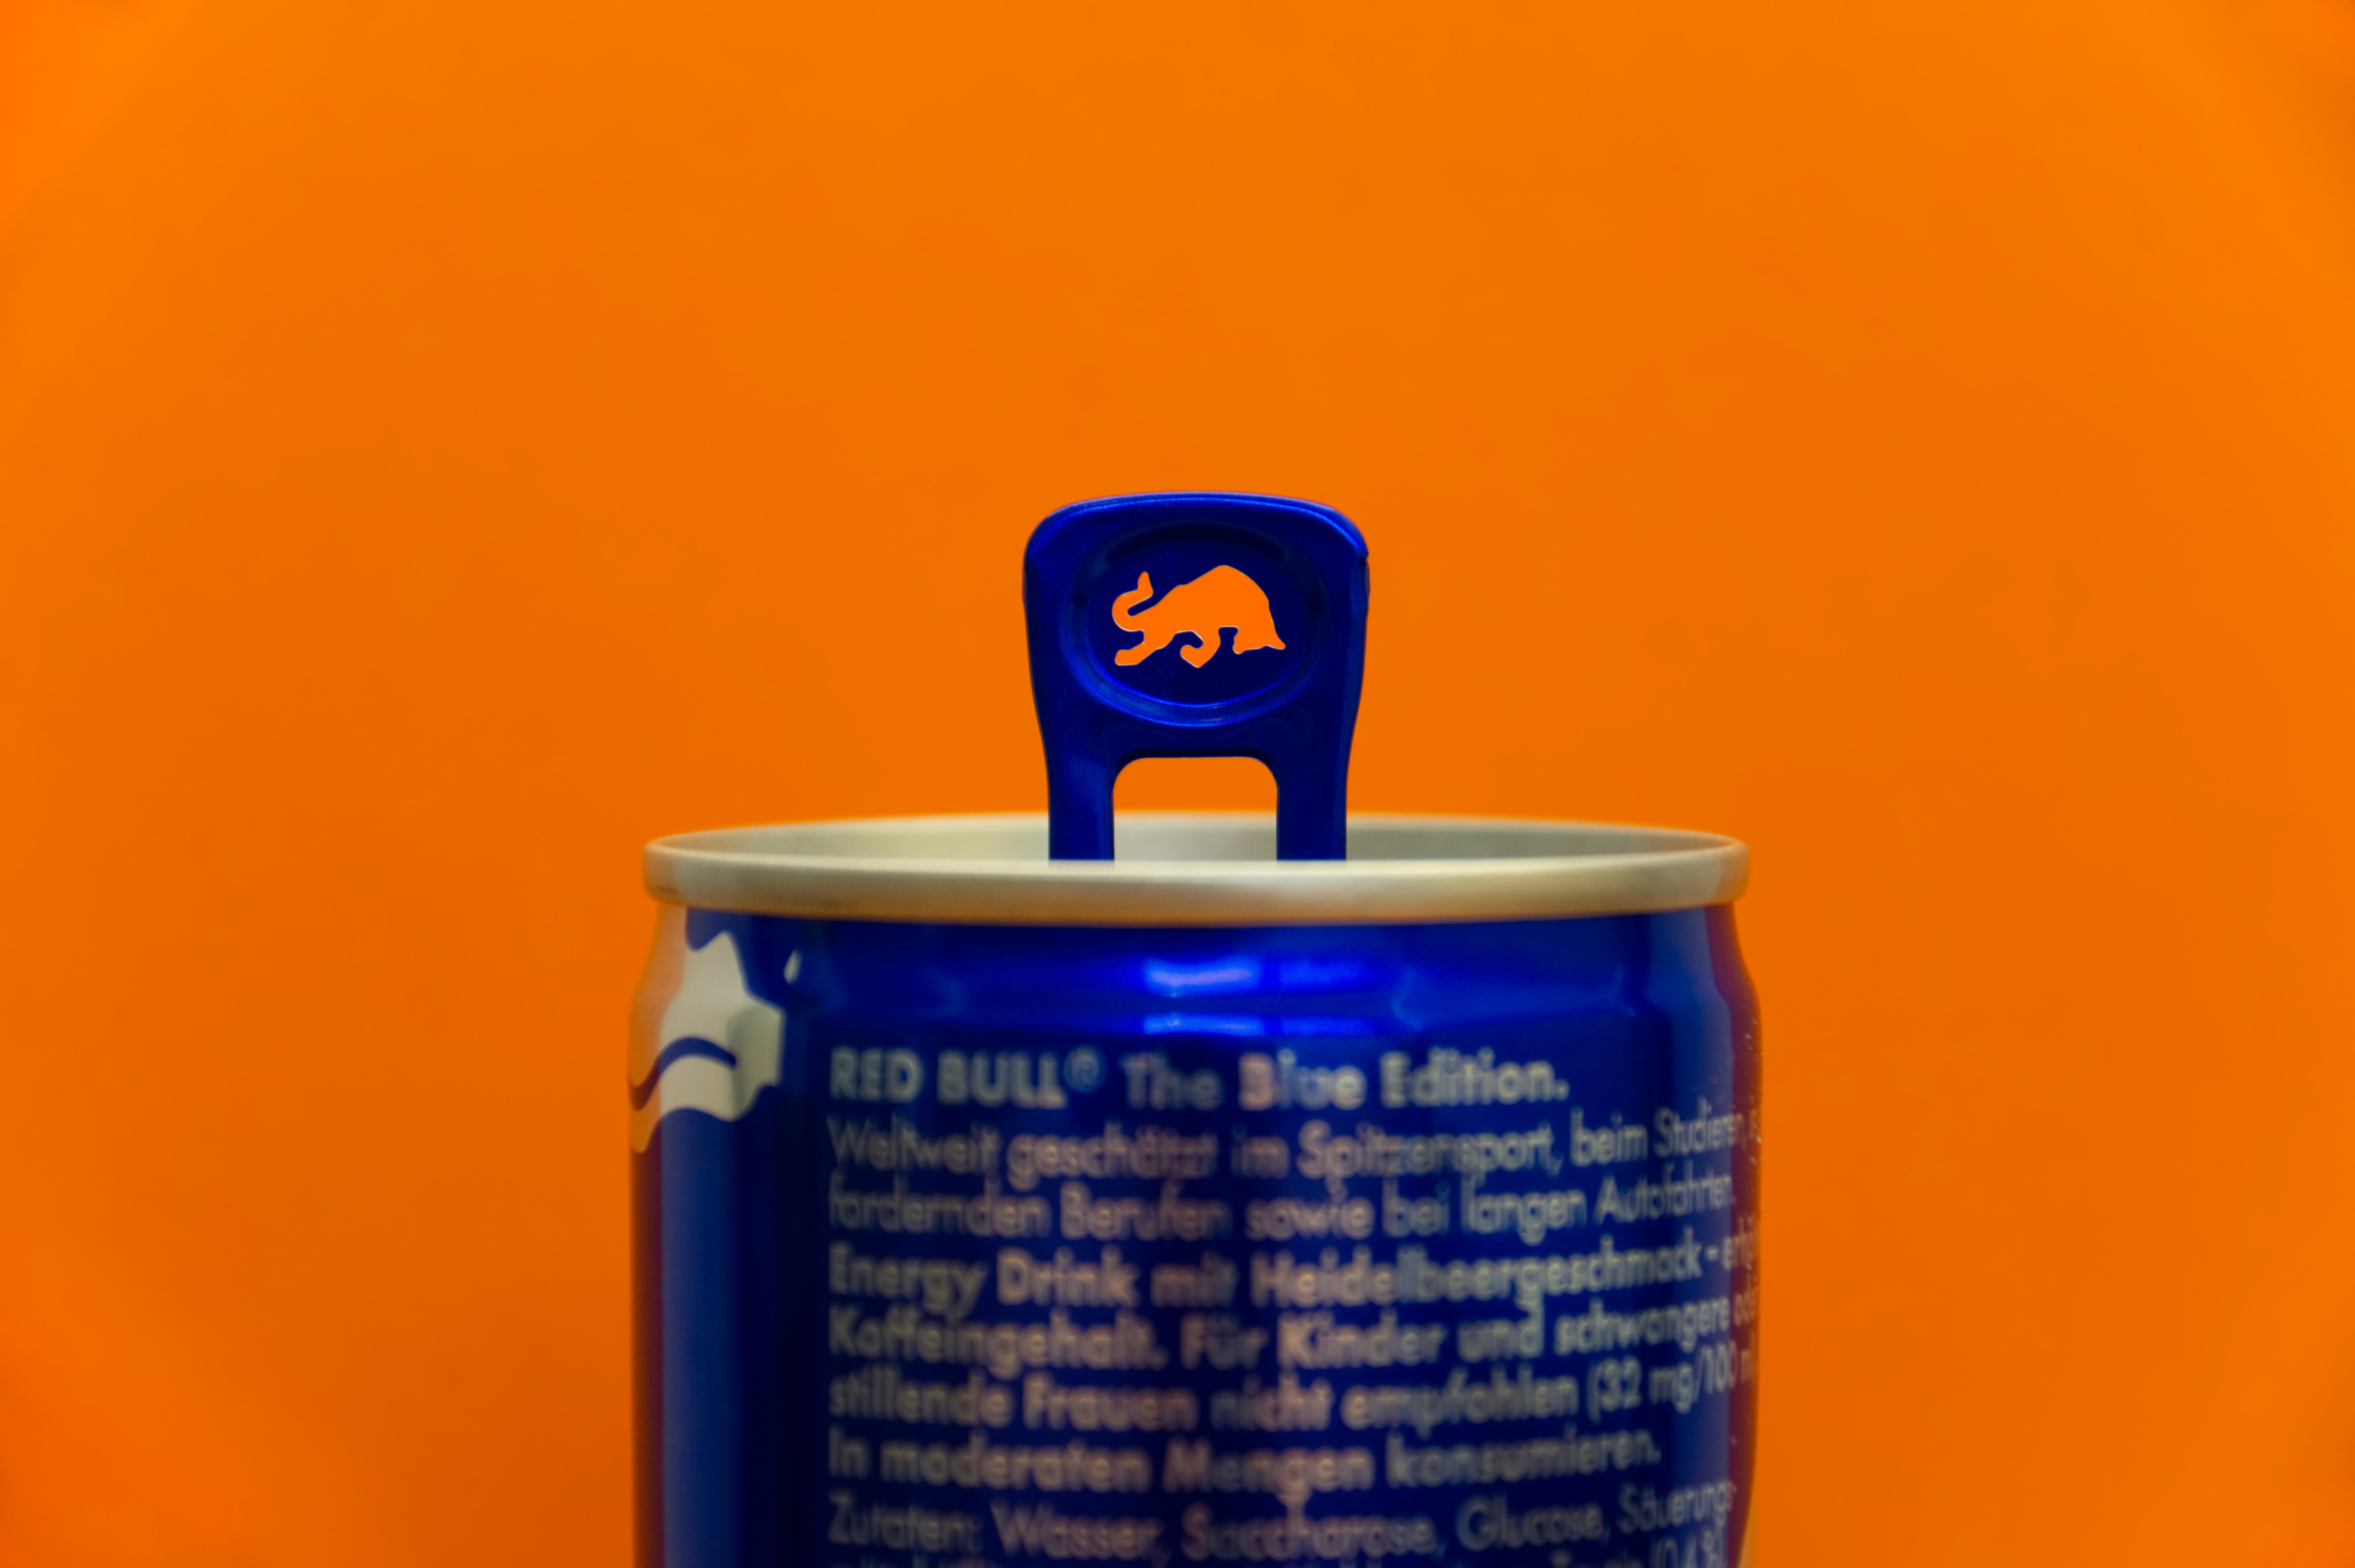 A close-up of Red Bull's can, showing the bull in the ring pull